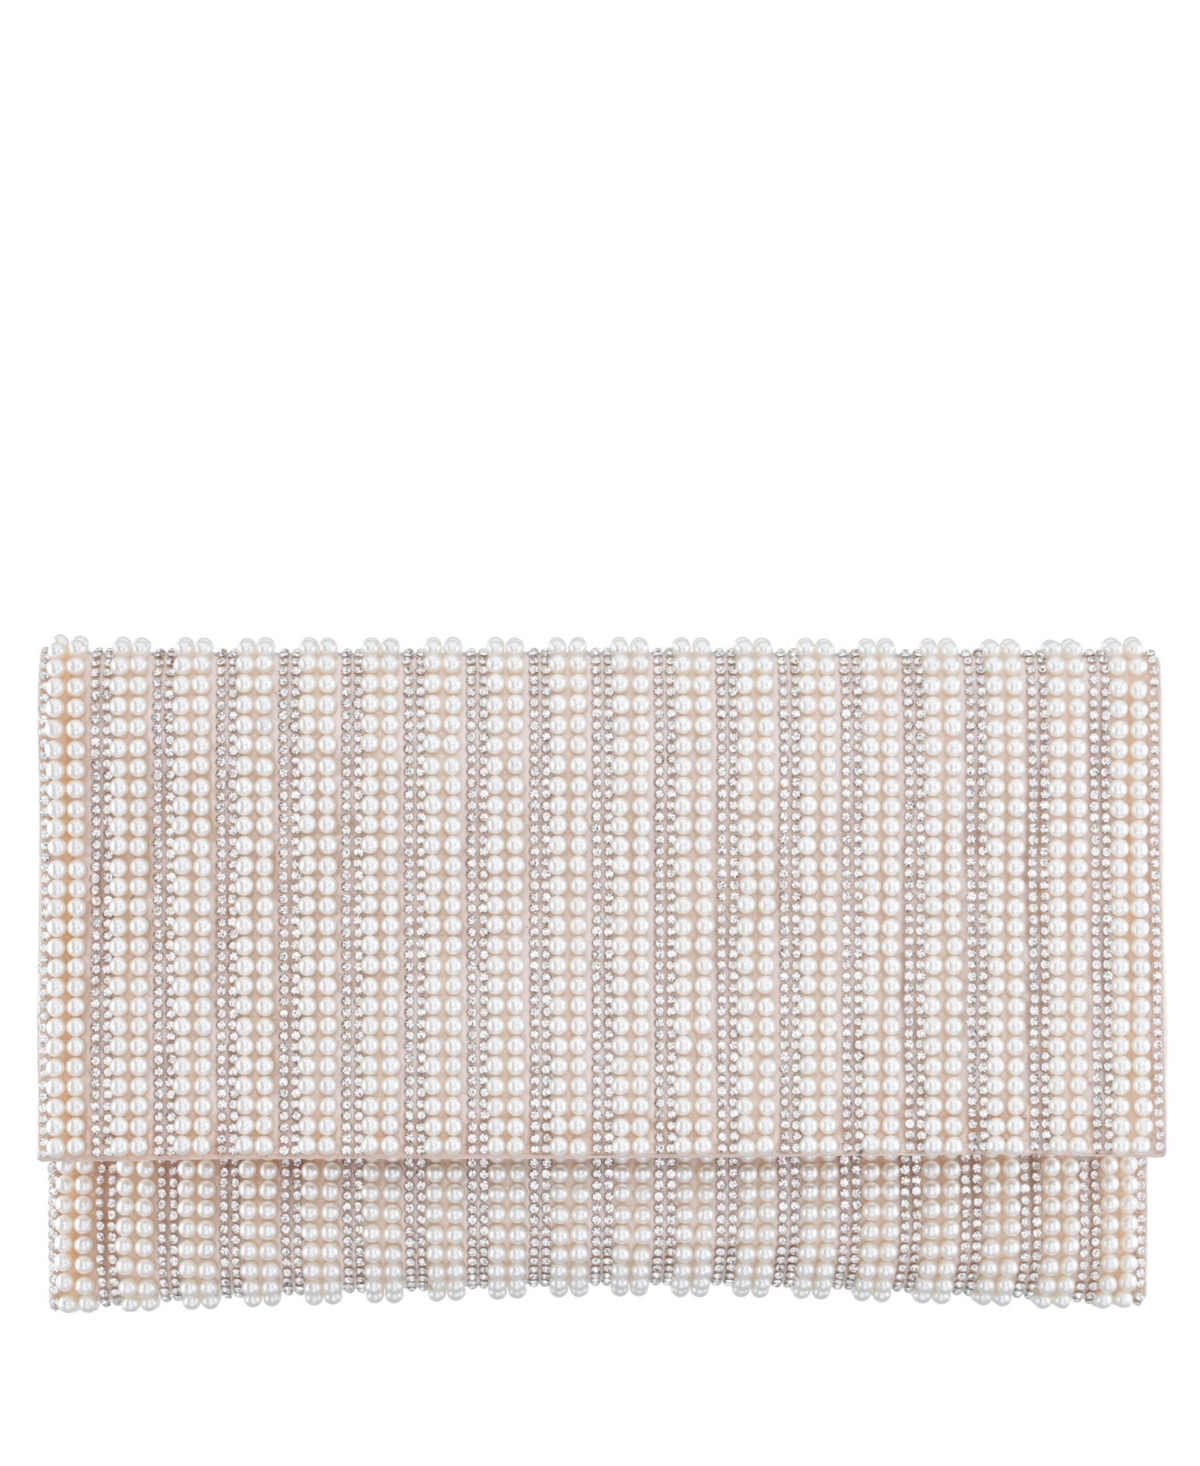 Women's Allover Imitation Pearl and Crystal Envelope Clutch - White